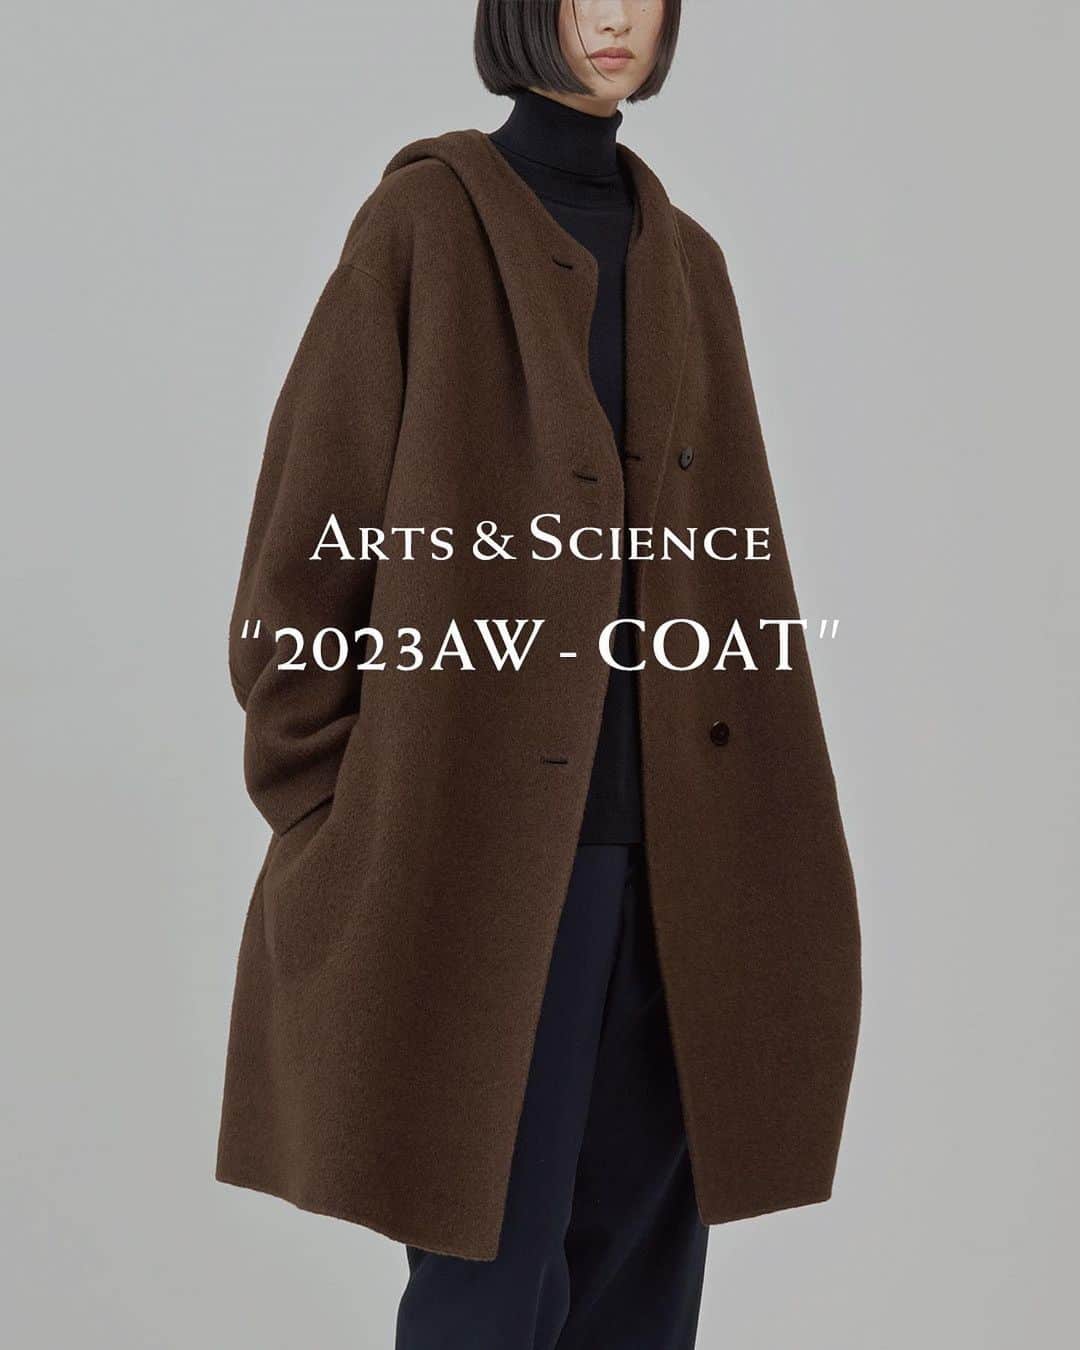 ARTS&SCIENCE official accountさんのインスタグラム写真 - (ARTS&SCIENCE official accountInstagram)「・ A&S “2023AW - COAT”  ARTS&SCIENCEの各ショップでは、これからの季節に活躍するコートをご紹介しています。ぜひ店頭でご覧ください。  [ STYLE 1 ] Hooded coat middle / ¥264,000 SHOP: A&S AOYAMA, A&S MARUNOUCHI, A&S KYOTO  [ STYLE 2 ] Stand collar coat / ¥137,500 SHOP: A&S AOYAMA, A&S MARUNOUCHI, A&S KYOTO, A&S FUKUOKA  [ STYLE 3 ] Linner vest long / ¥130,900 SHOP: A&S AOYAMA, A&S MARUNOUCHI, A&S FUKUOKA  @arts_and_science  入荷日はアイテムにより異なります。すべてのアイテムは通信販売も承っております。商品についてのお問い合わせは店舗、またはWEBサイトのコンタクトフォームよりご連絡ください。 Launch dates will vary per item. For item requests and direct mail orders, please contact our shops directly or use our contact form from our official web page.  Photos by @kousuke_ichikawa  #artsandscience_window #artsandscience」11月9日 19時00分 - arts_and_science